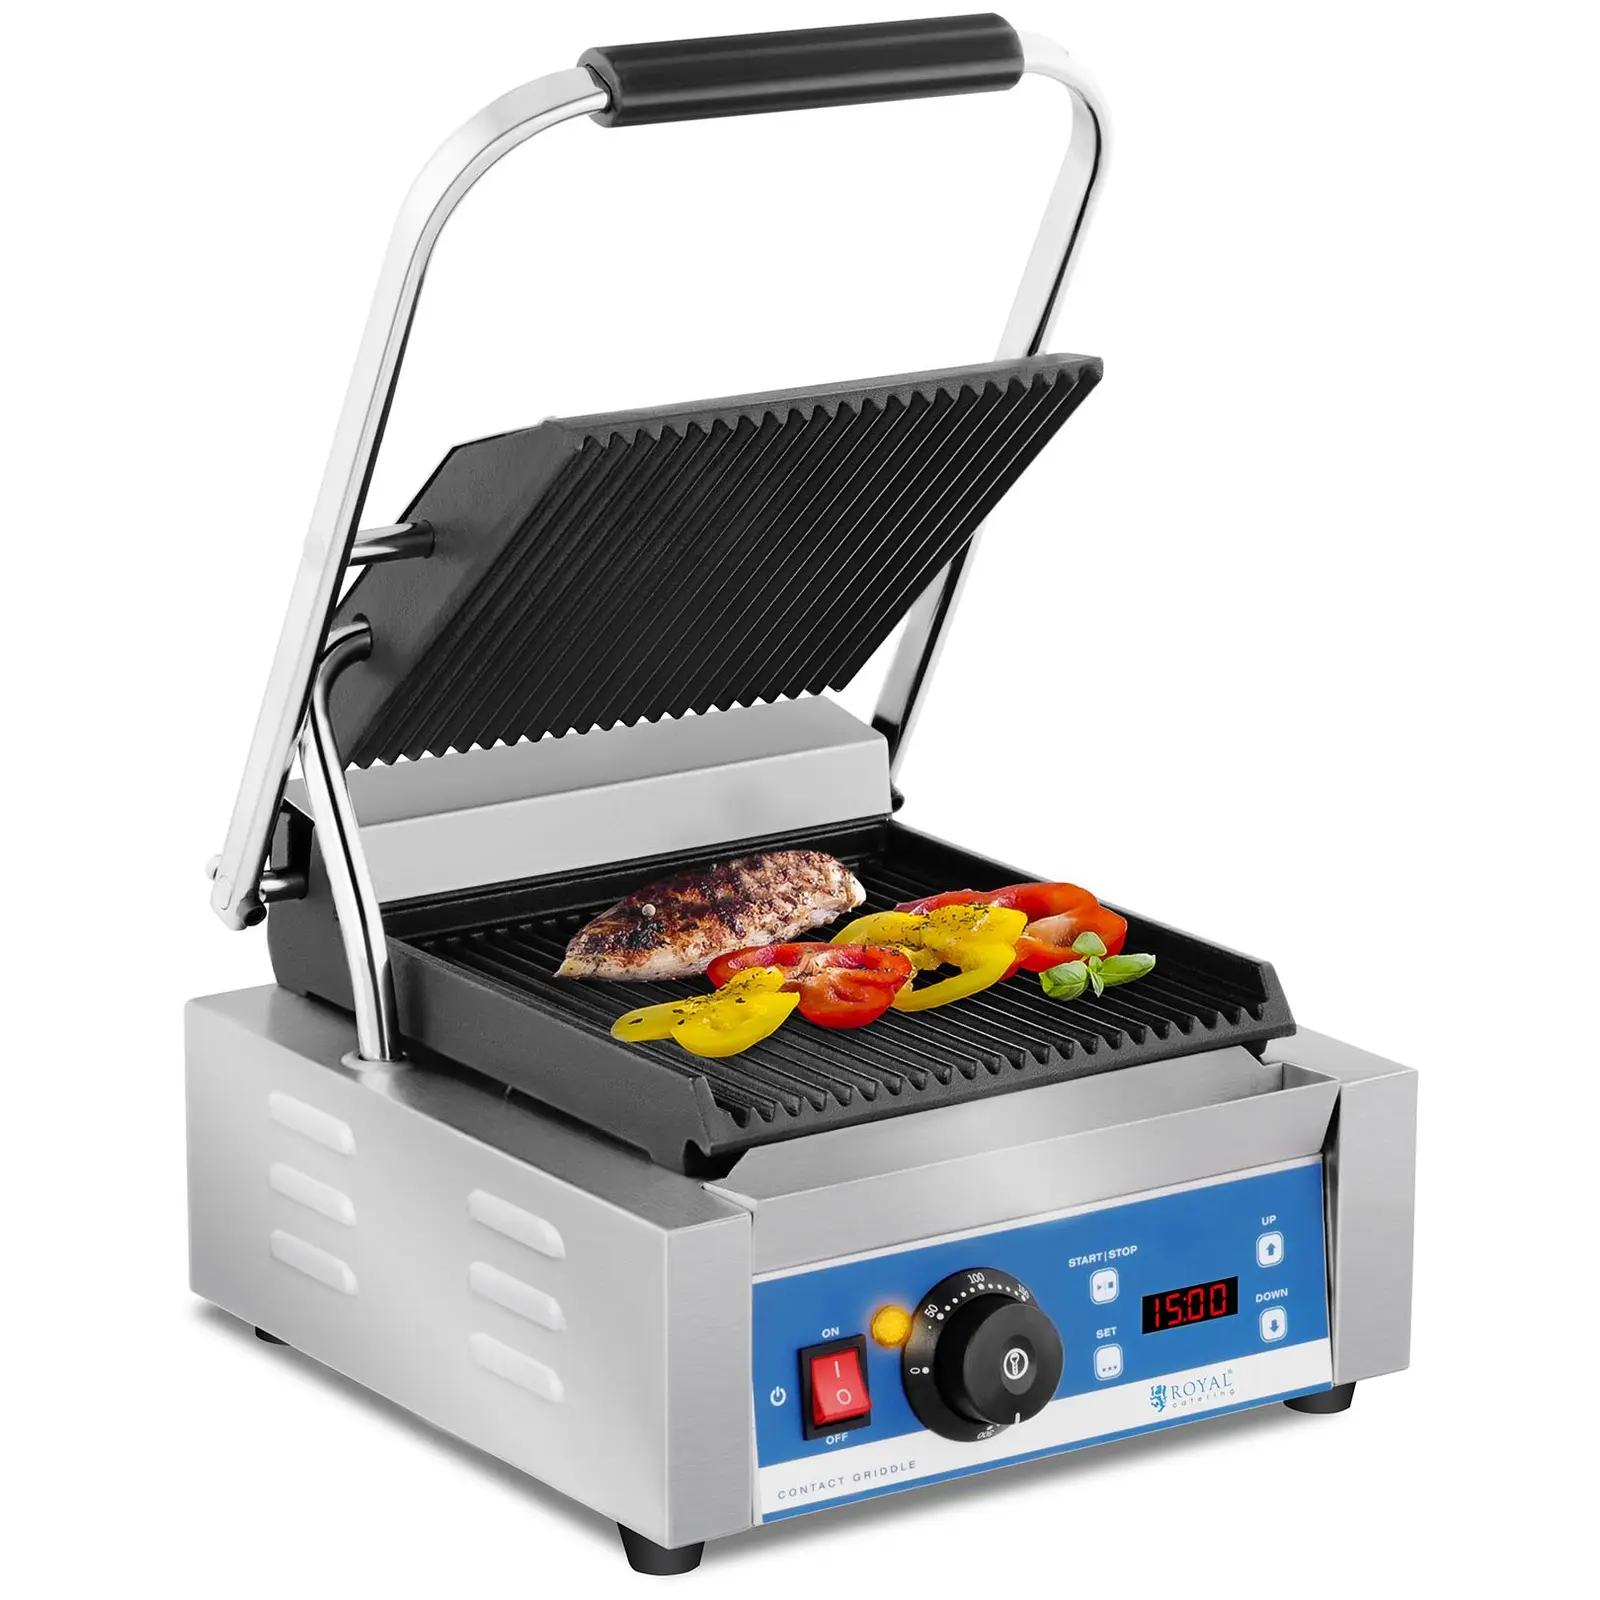 Contact grill - griddle - timer - 1,800 W